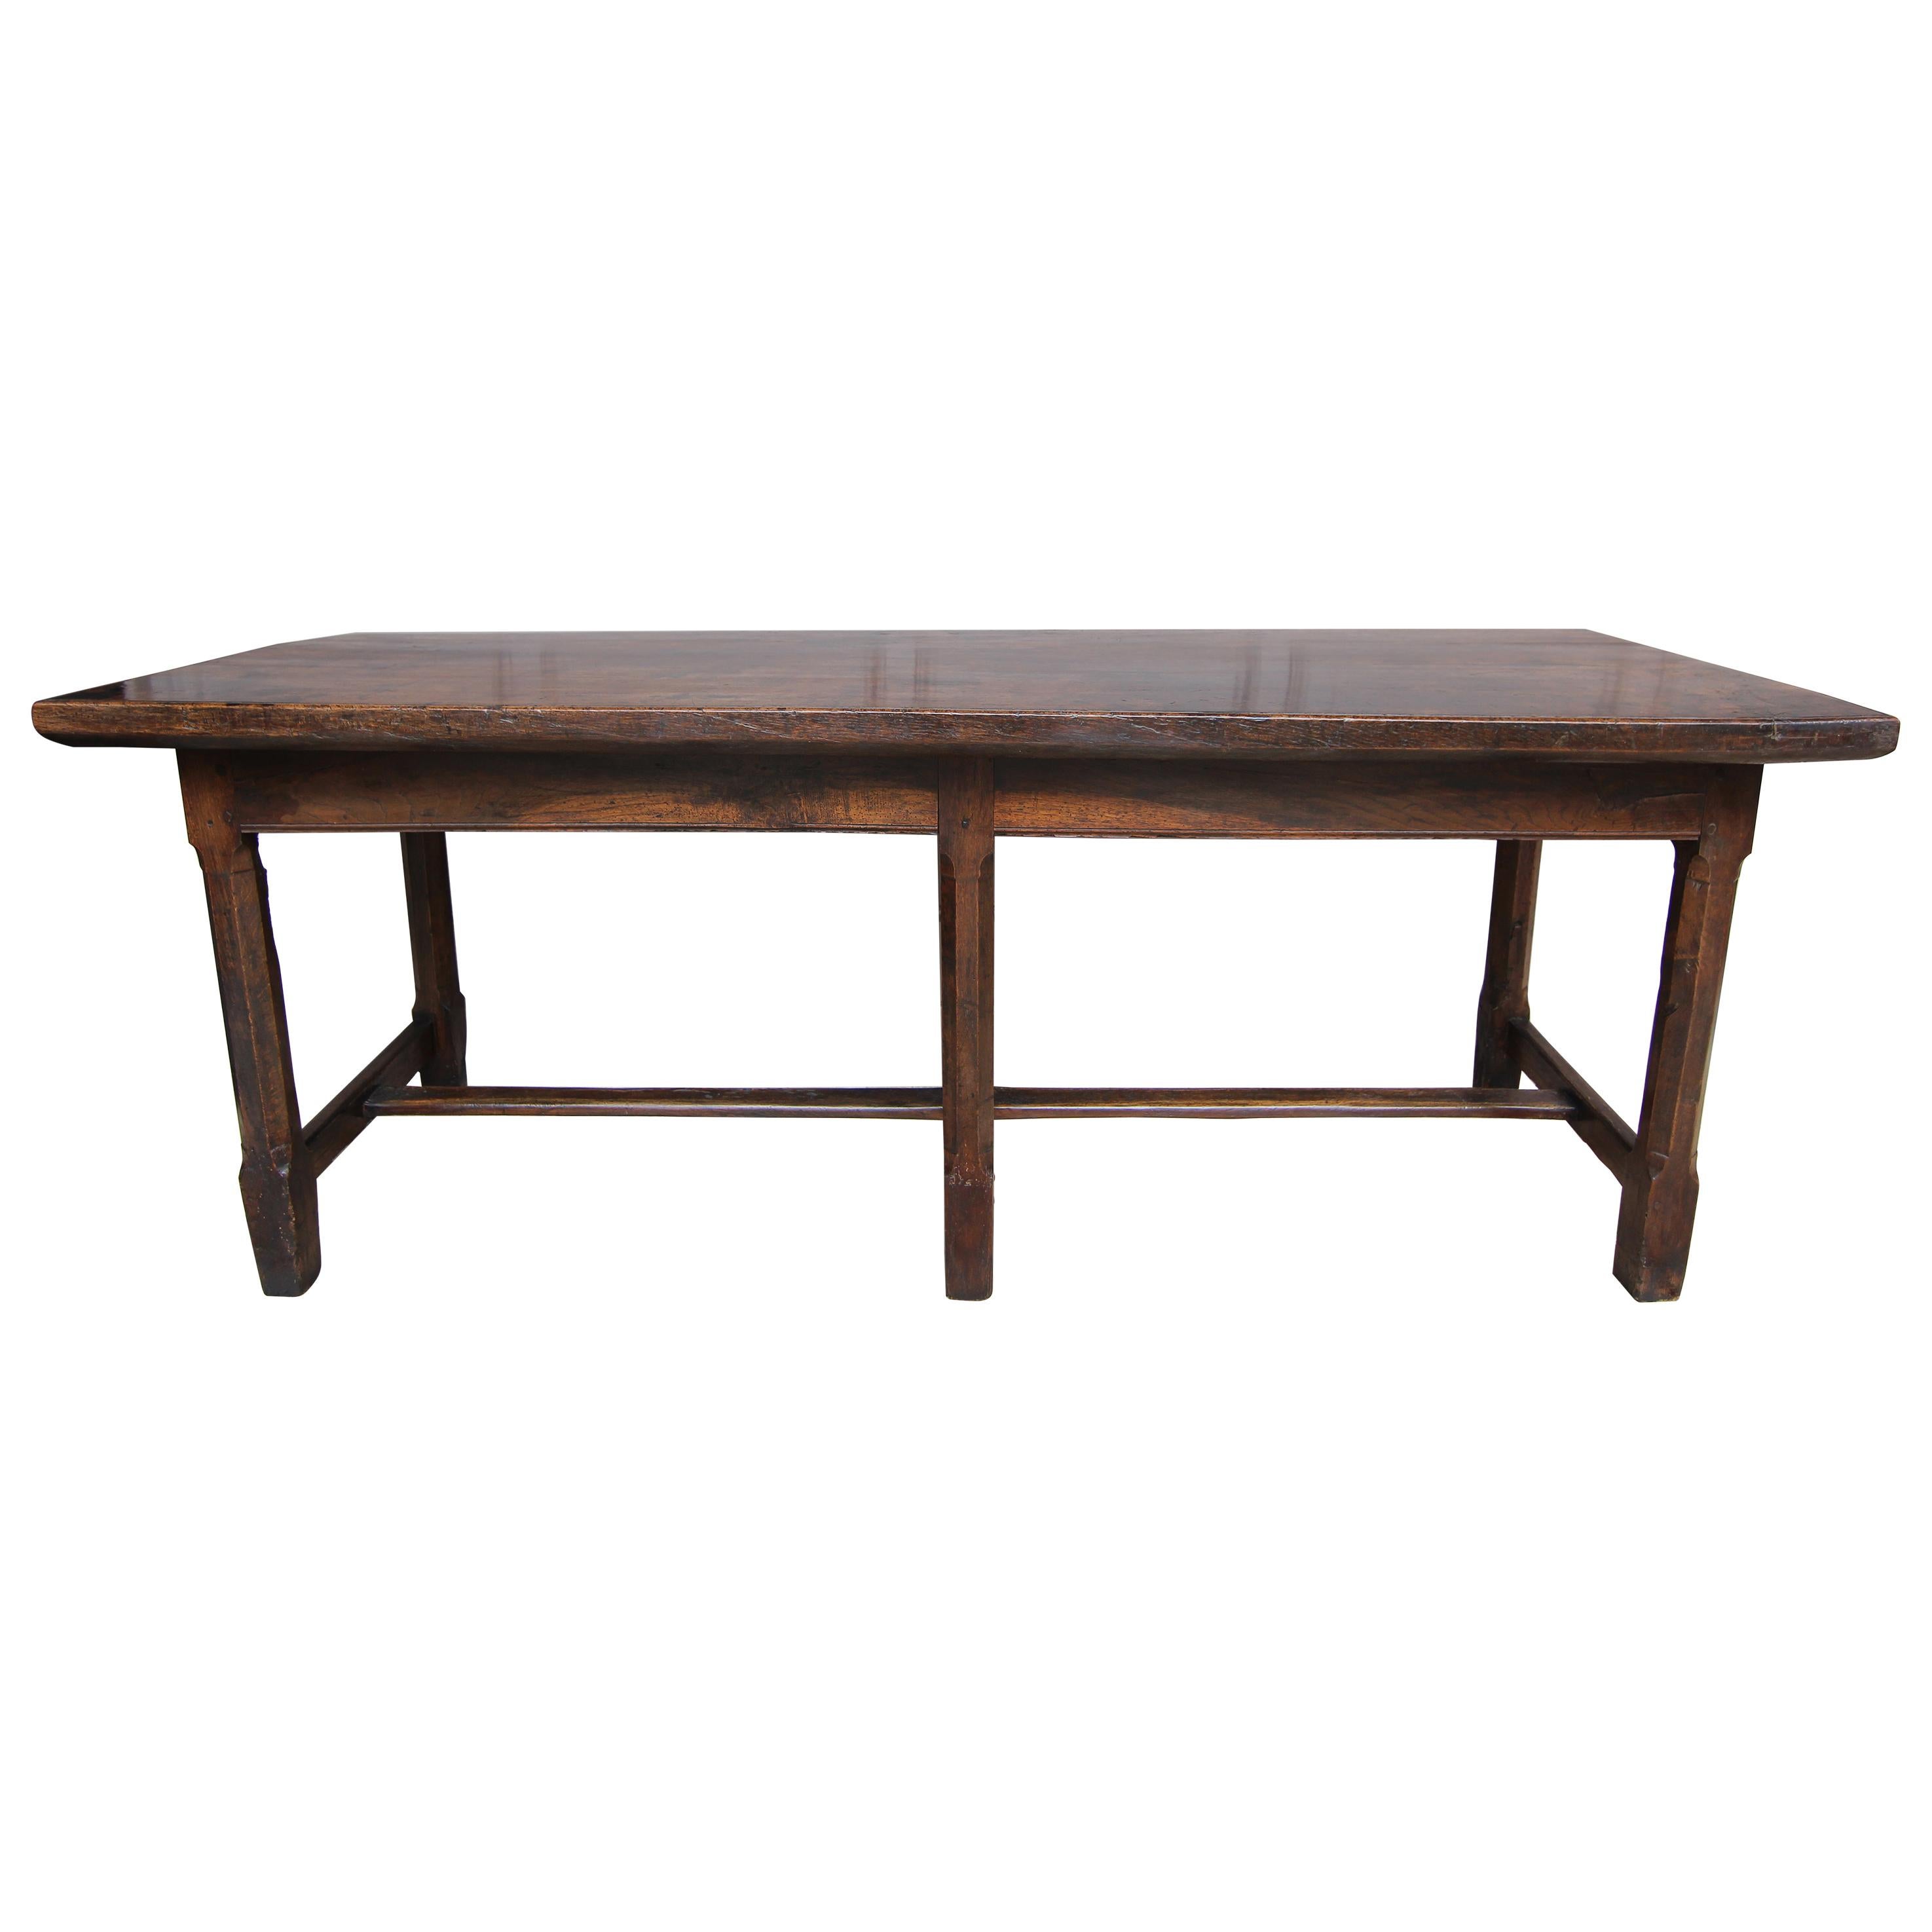 18th Century French Refectory or Dining Table Made of Oak